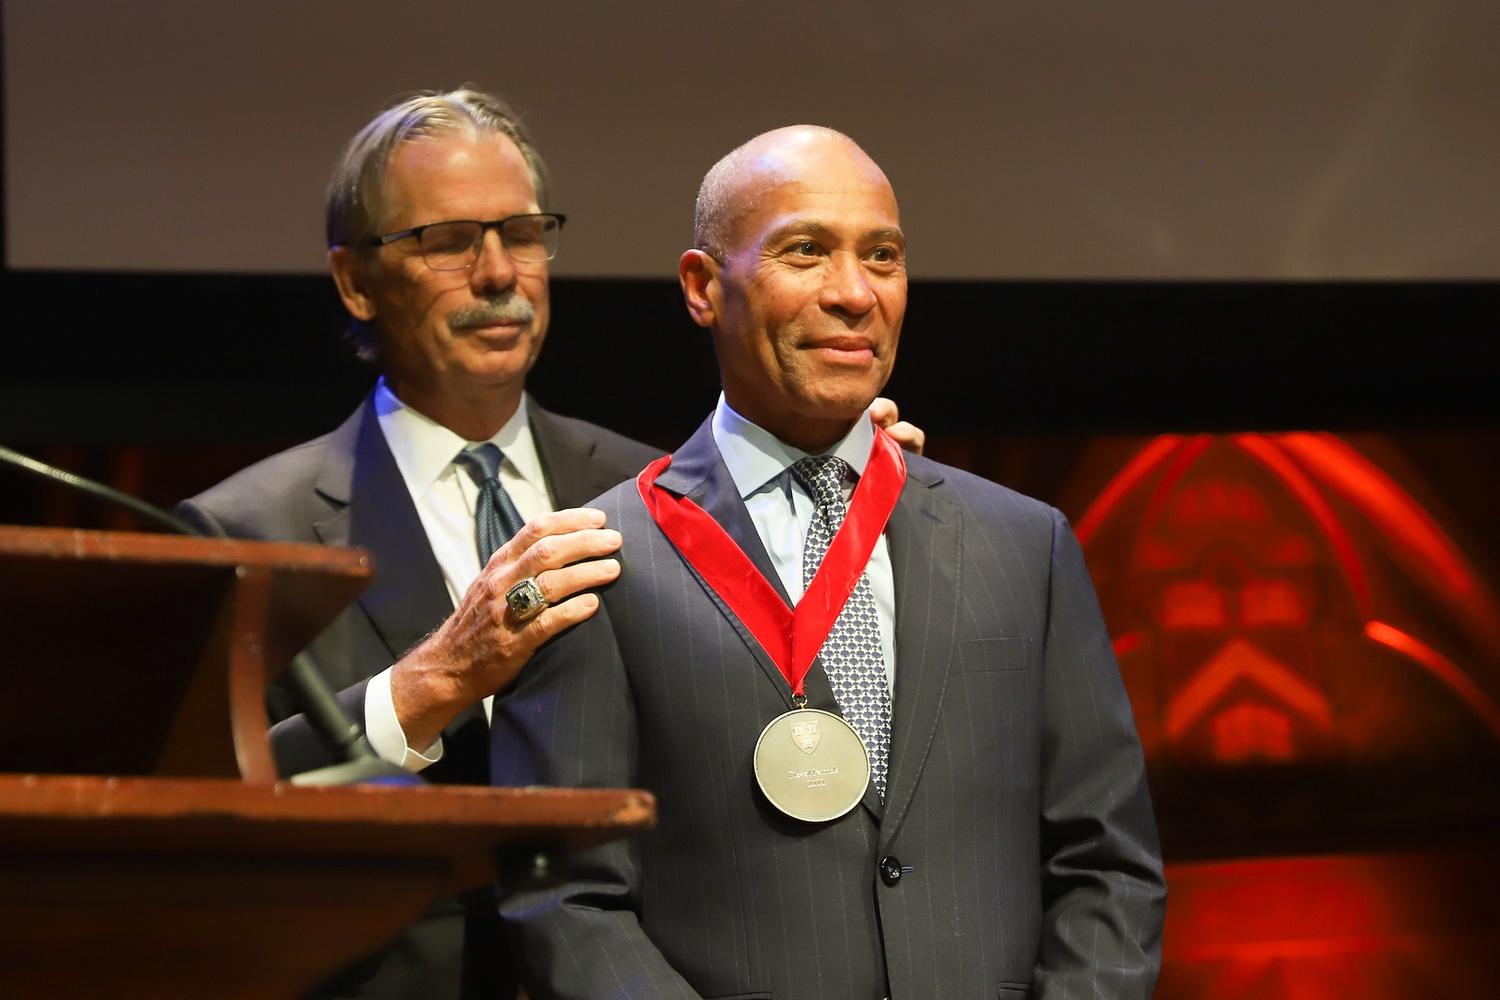 Deval L. Patrick '78 is the former governor of Massachusetts and a current professor of the practice of public leadership at the HKS.